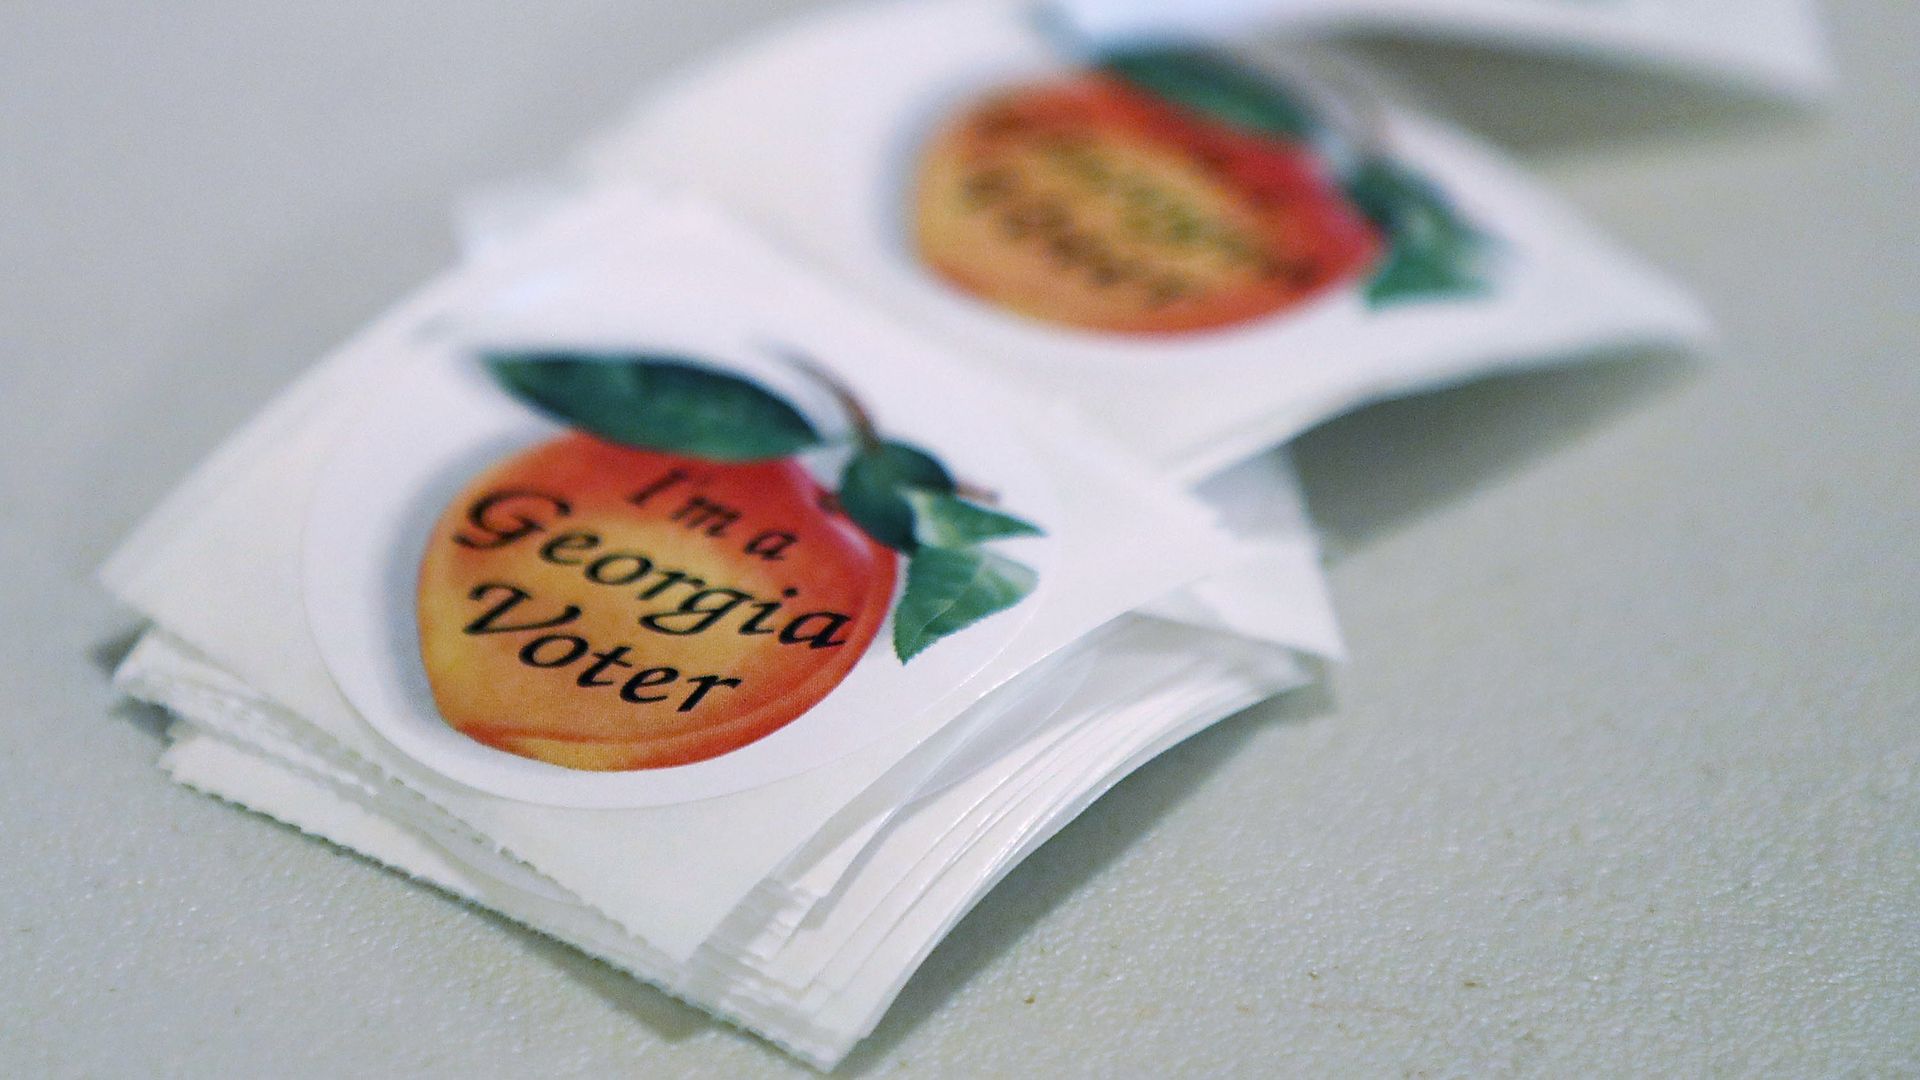 A voting-day sticker from Goergia